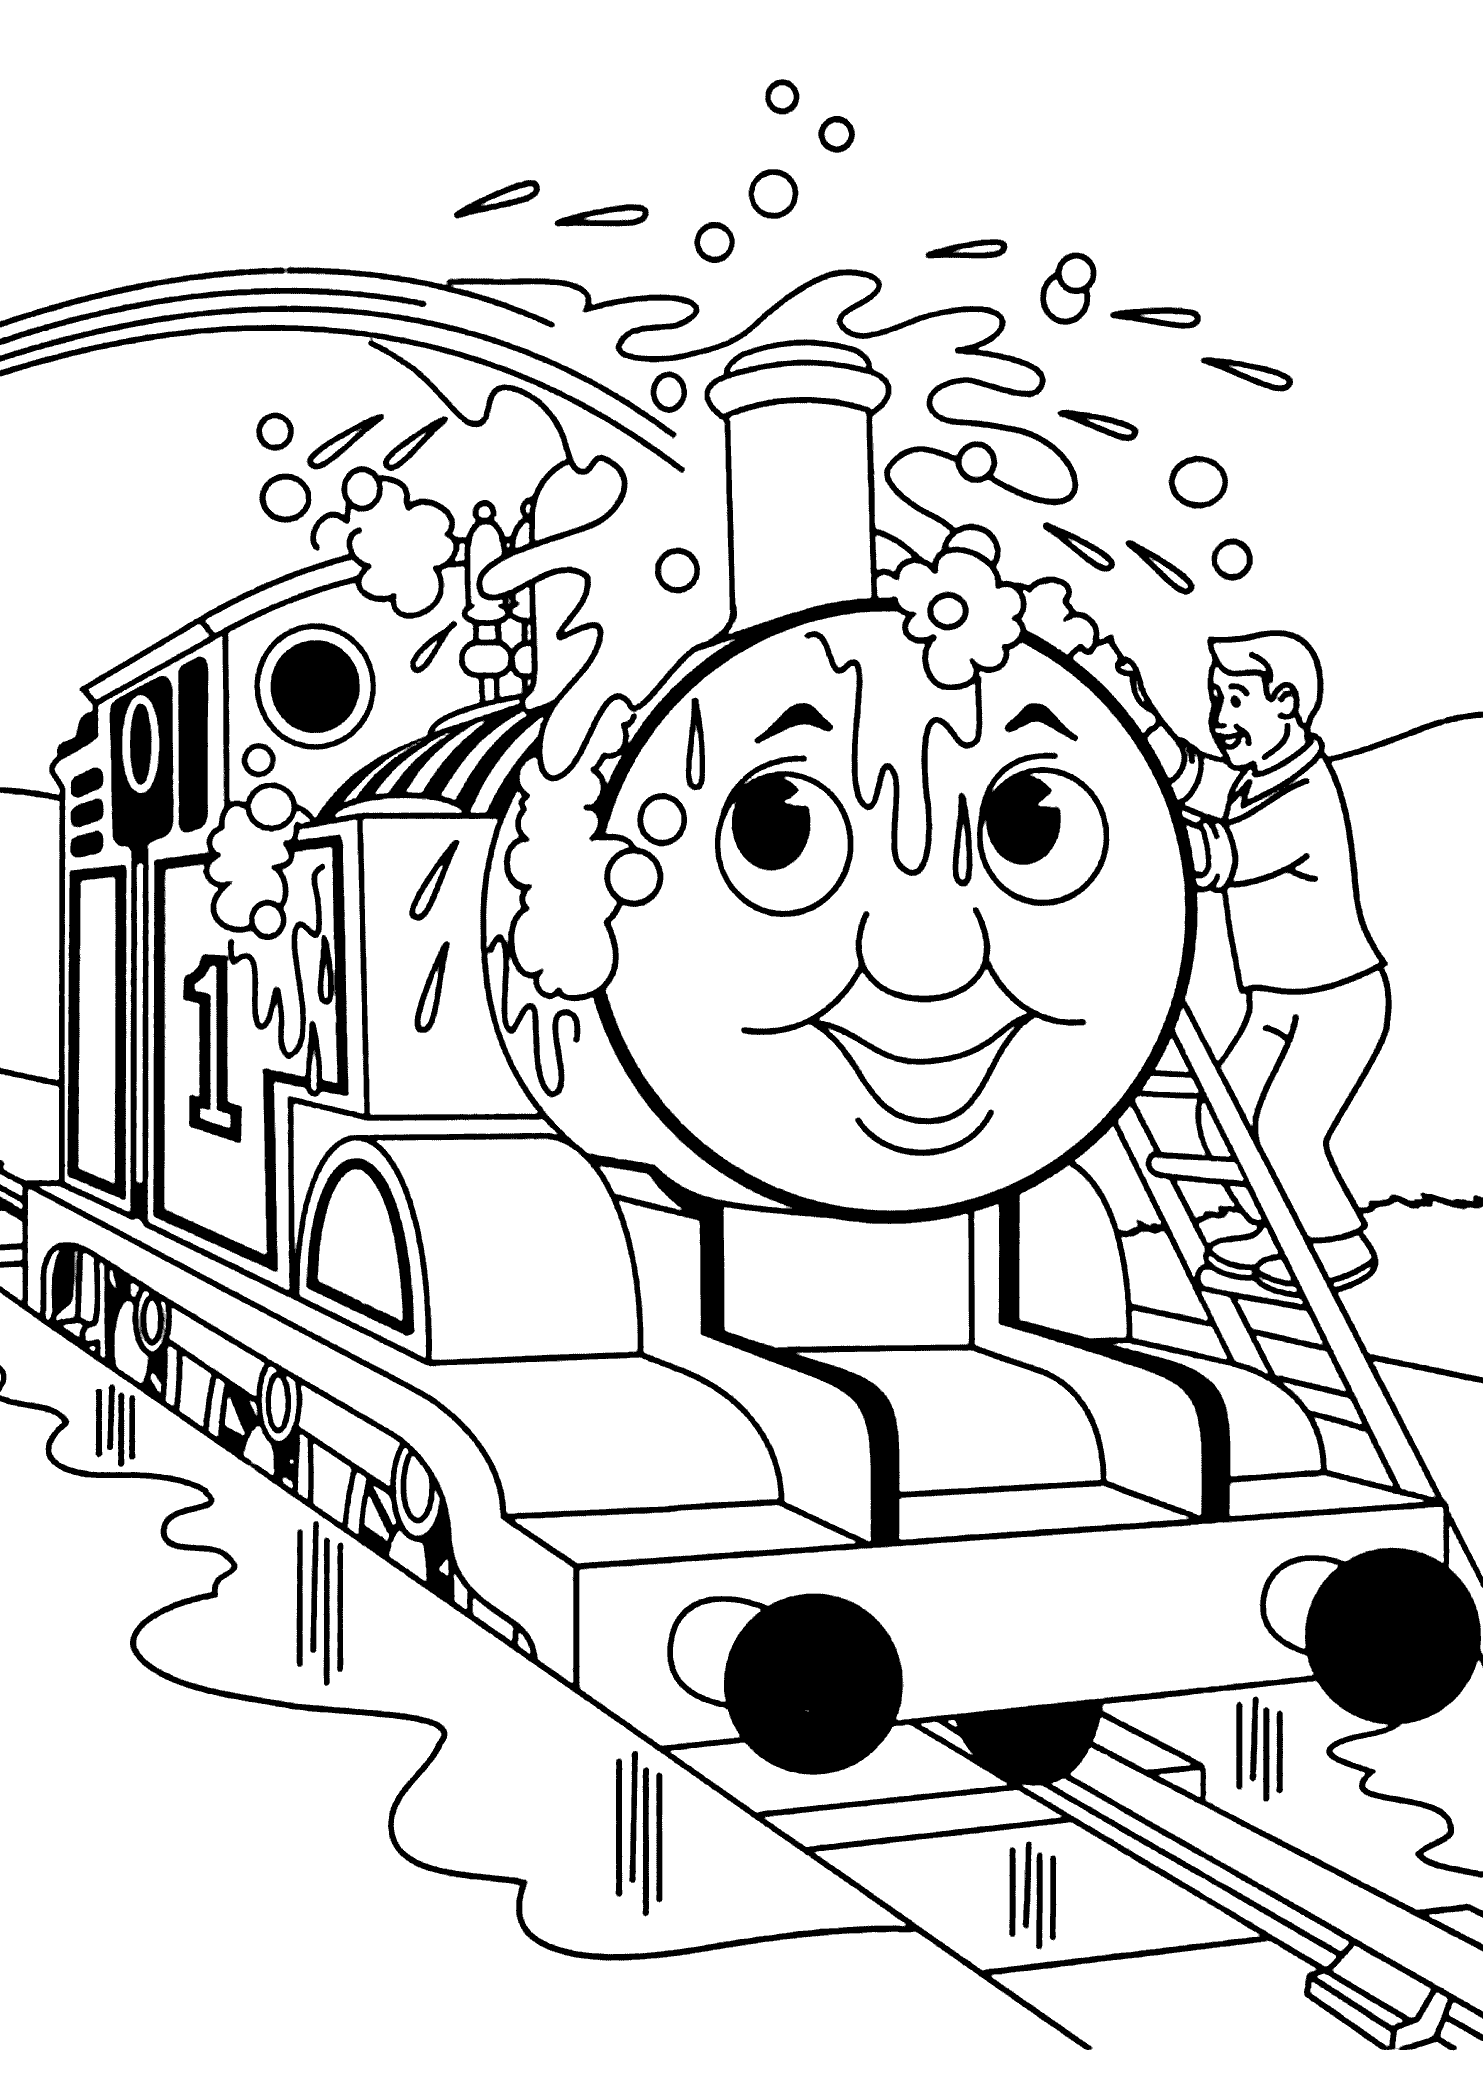 thomas and friends coloring pages 30 free printable thomas the train coloring pages friends and thomas pages coloring 